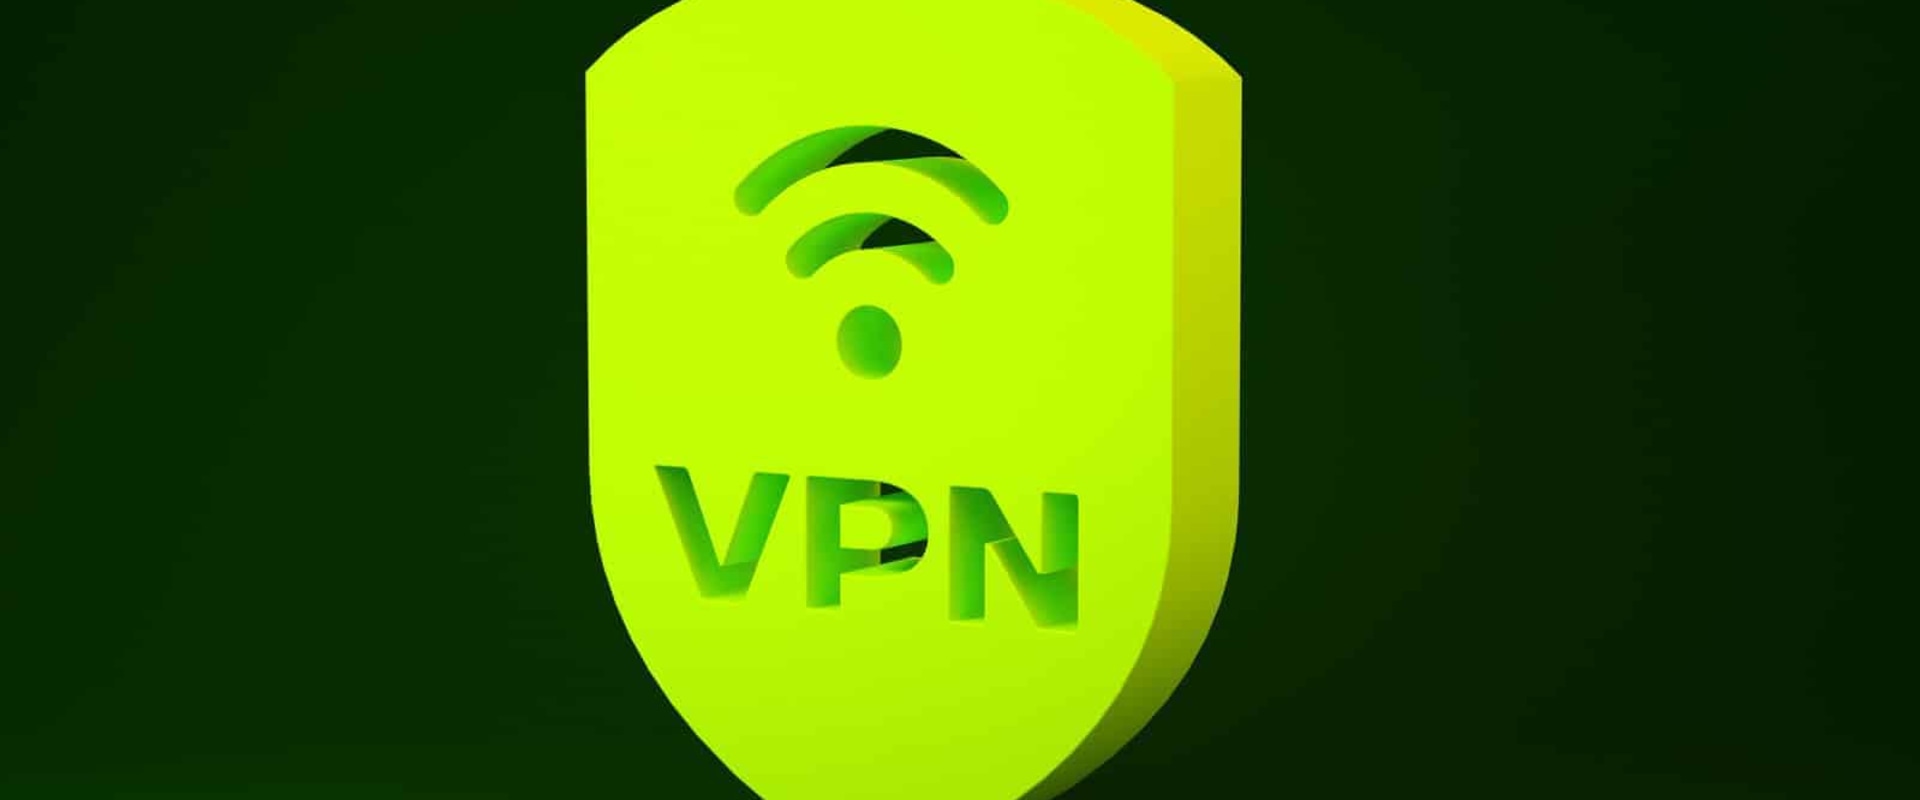 Can I Use a Bitcoin VPN to Access Streaming Services Like Netflix or Hulu?